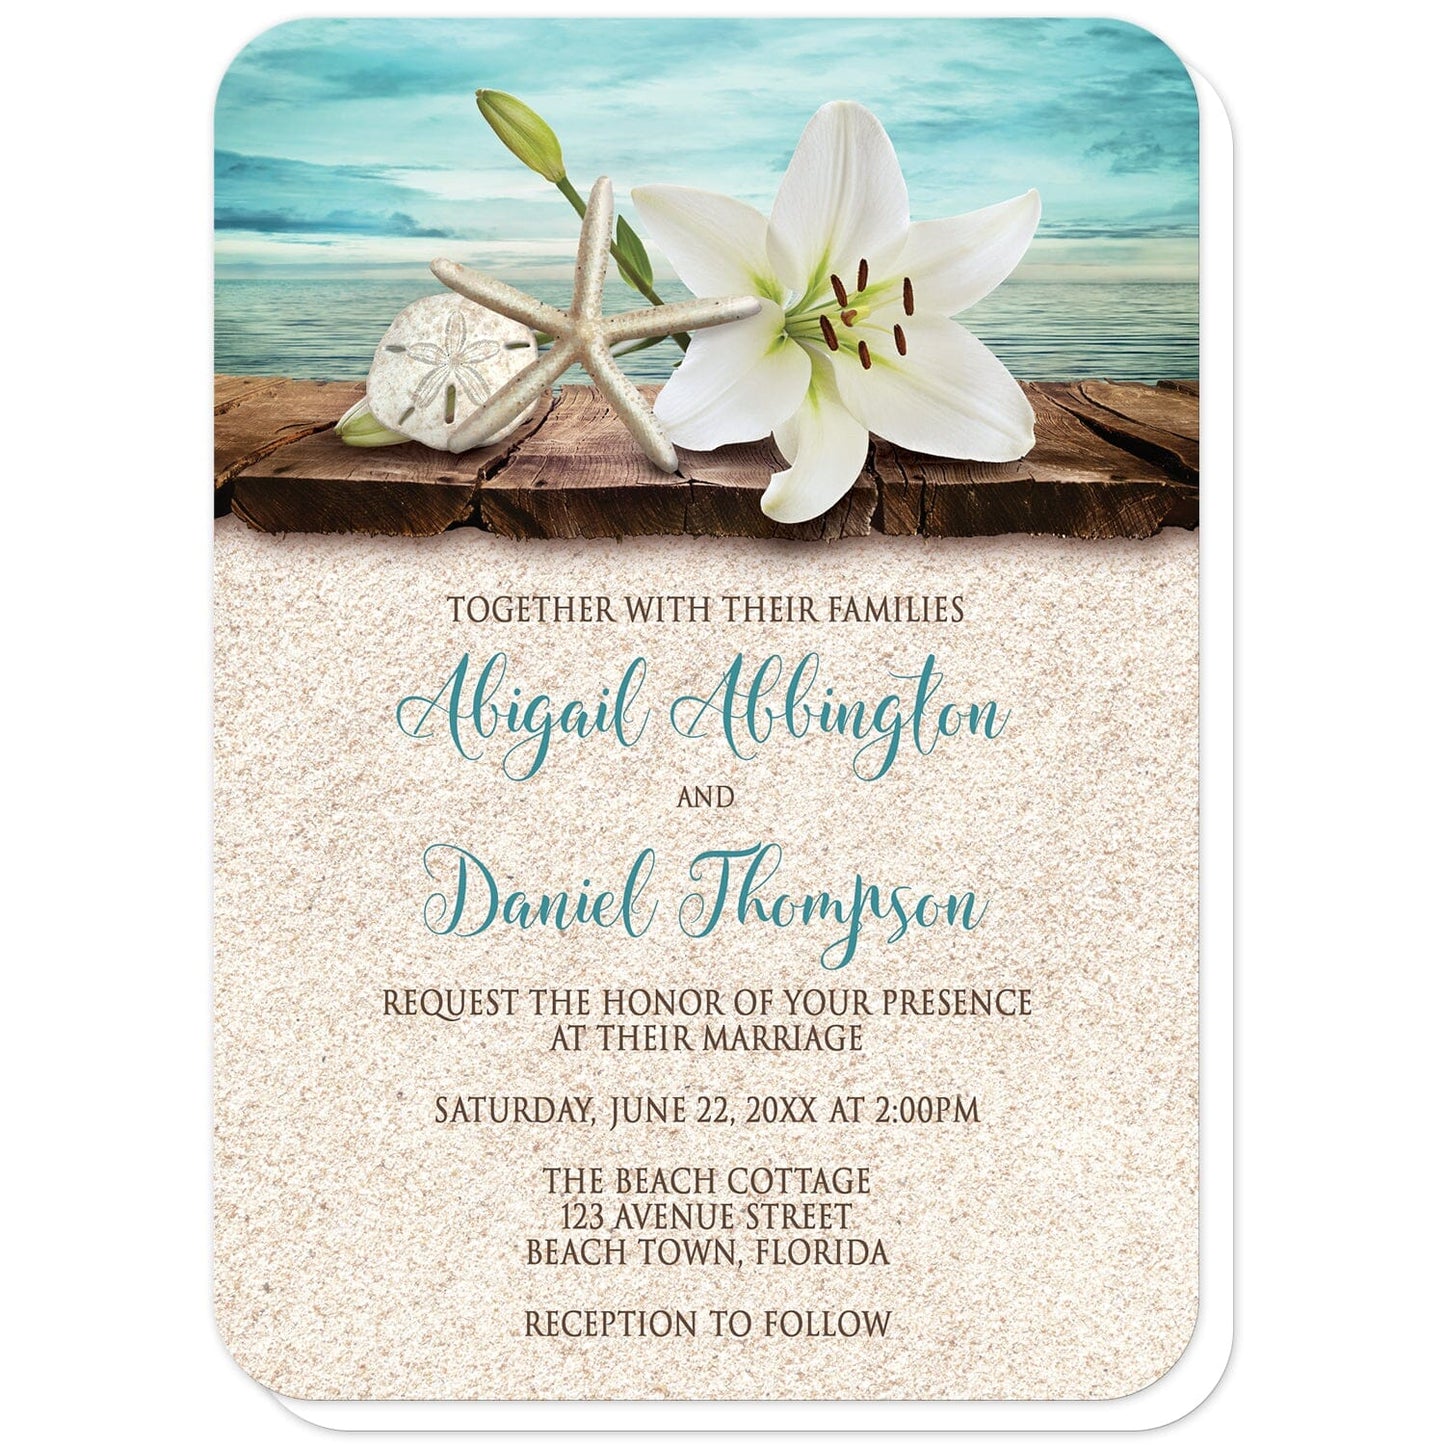 Lily Seashells and Sand Beach Wedding Invitations (with rounded corners) at Artistically Invited. Tropical invites with an elegant white lily, a starfish, and a sand dollar on a rustic wood dock overlooking the open water. These tropical lily invitations are fully illustrated in a beach color scheme of teal and turquoise, beige, and brown. Your personalized marriage celebration details are custom printed in dark brown and teal over a beige sand texture background design. 